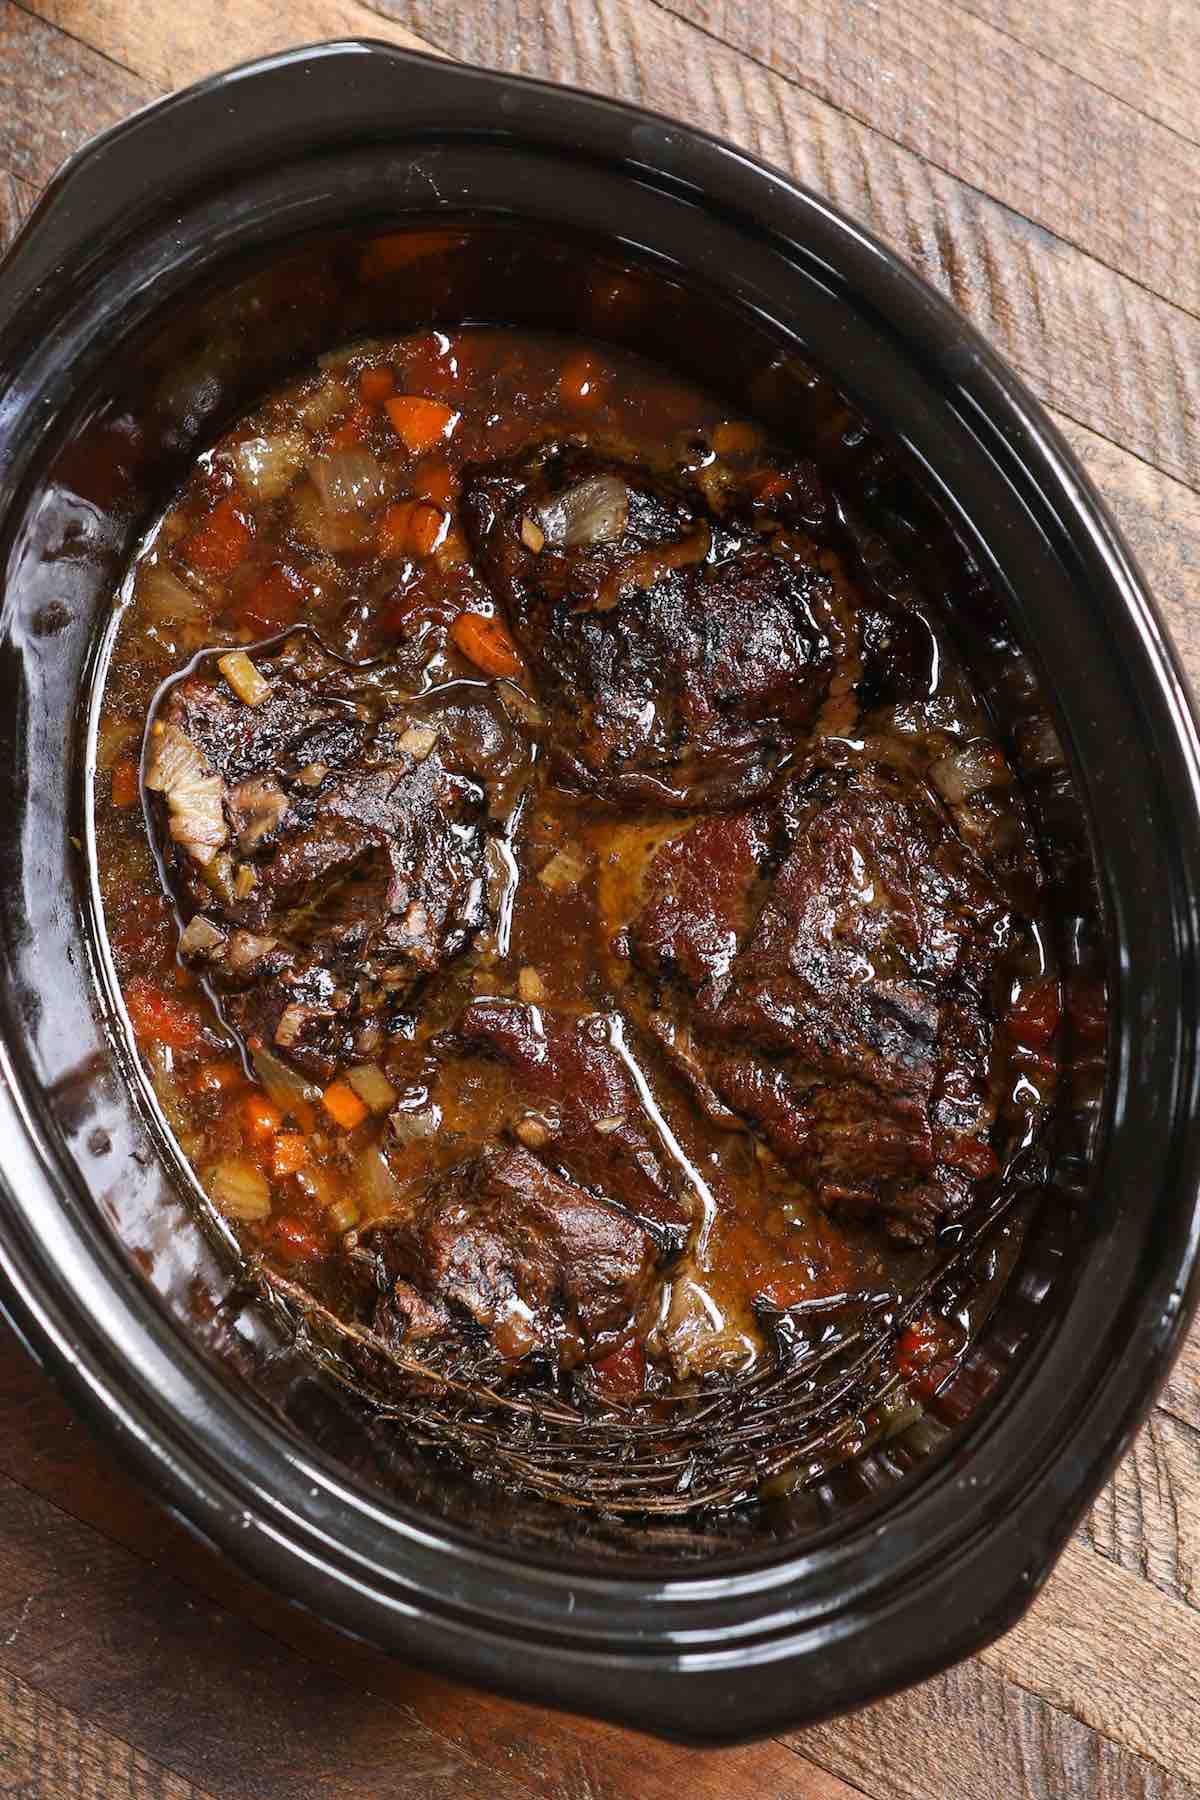 Slow cooked beef with vegetables in a crock pot